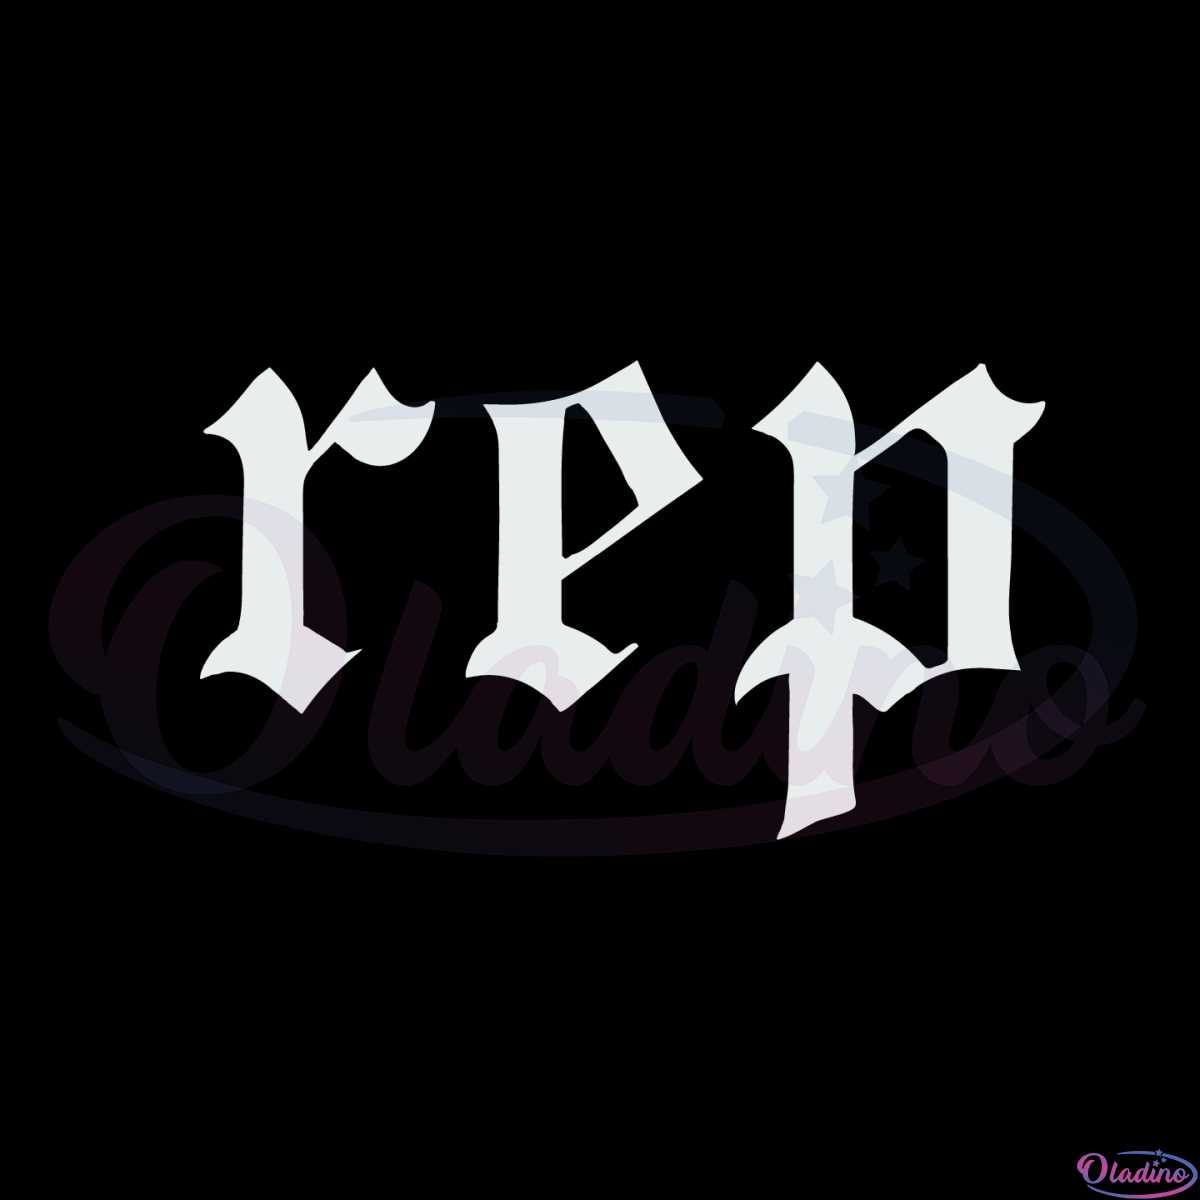 rep-reputation-song-taylor-swift-svg-files-silhouette-diy-craft